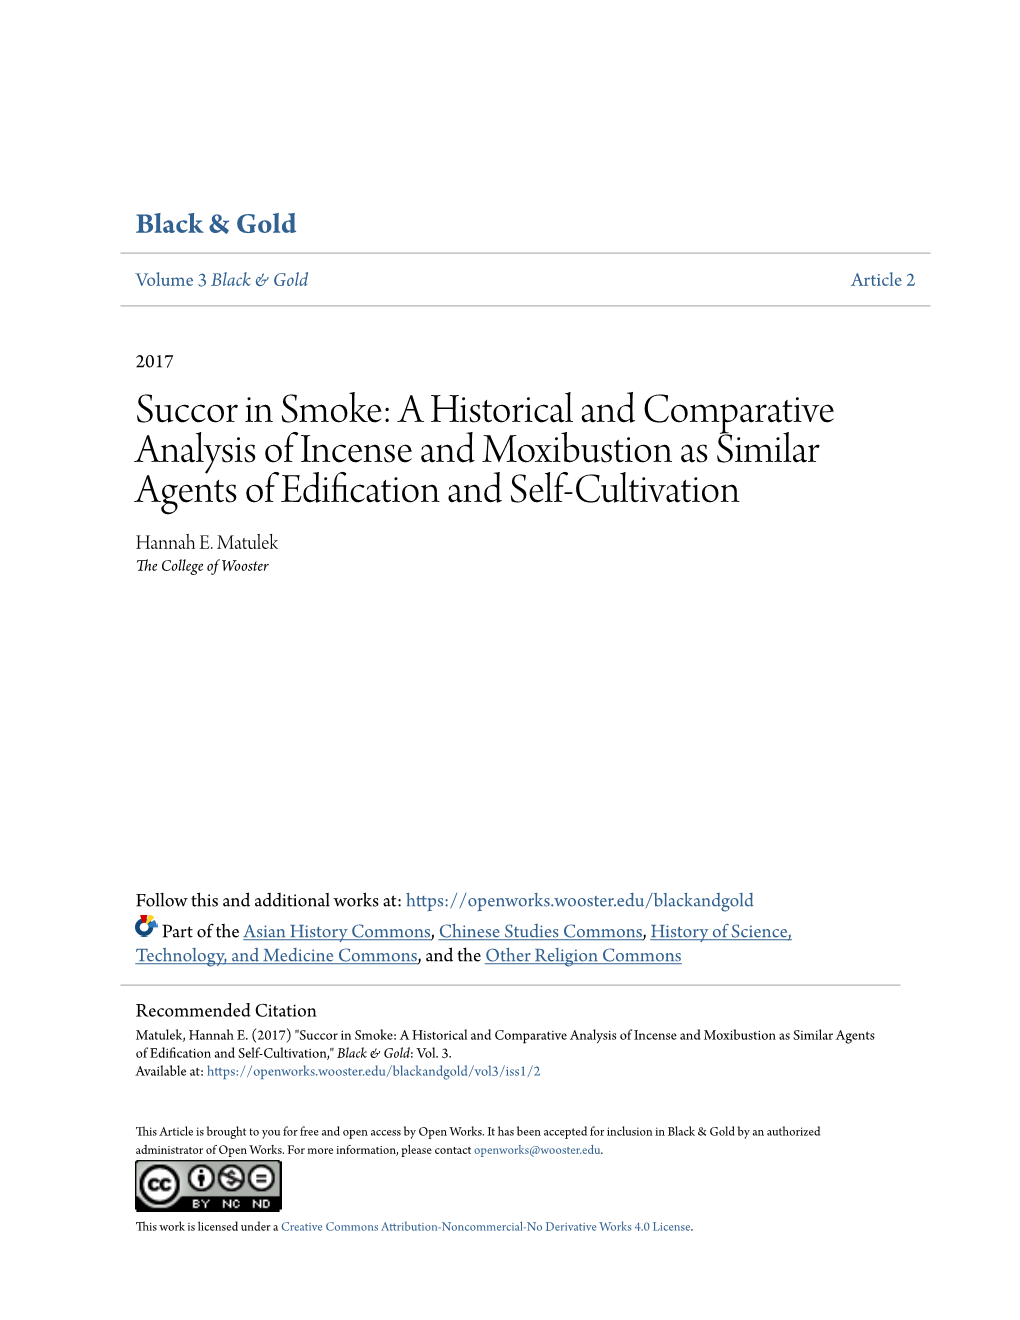 A Historical and Comparative Analysis of Incense and Moxibustion As Similar Agents of Edification and Self-Cultivation Hannah E